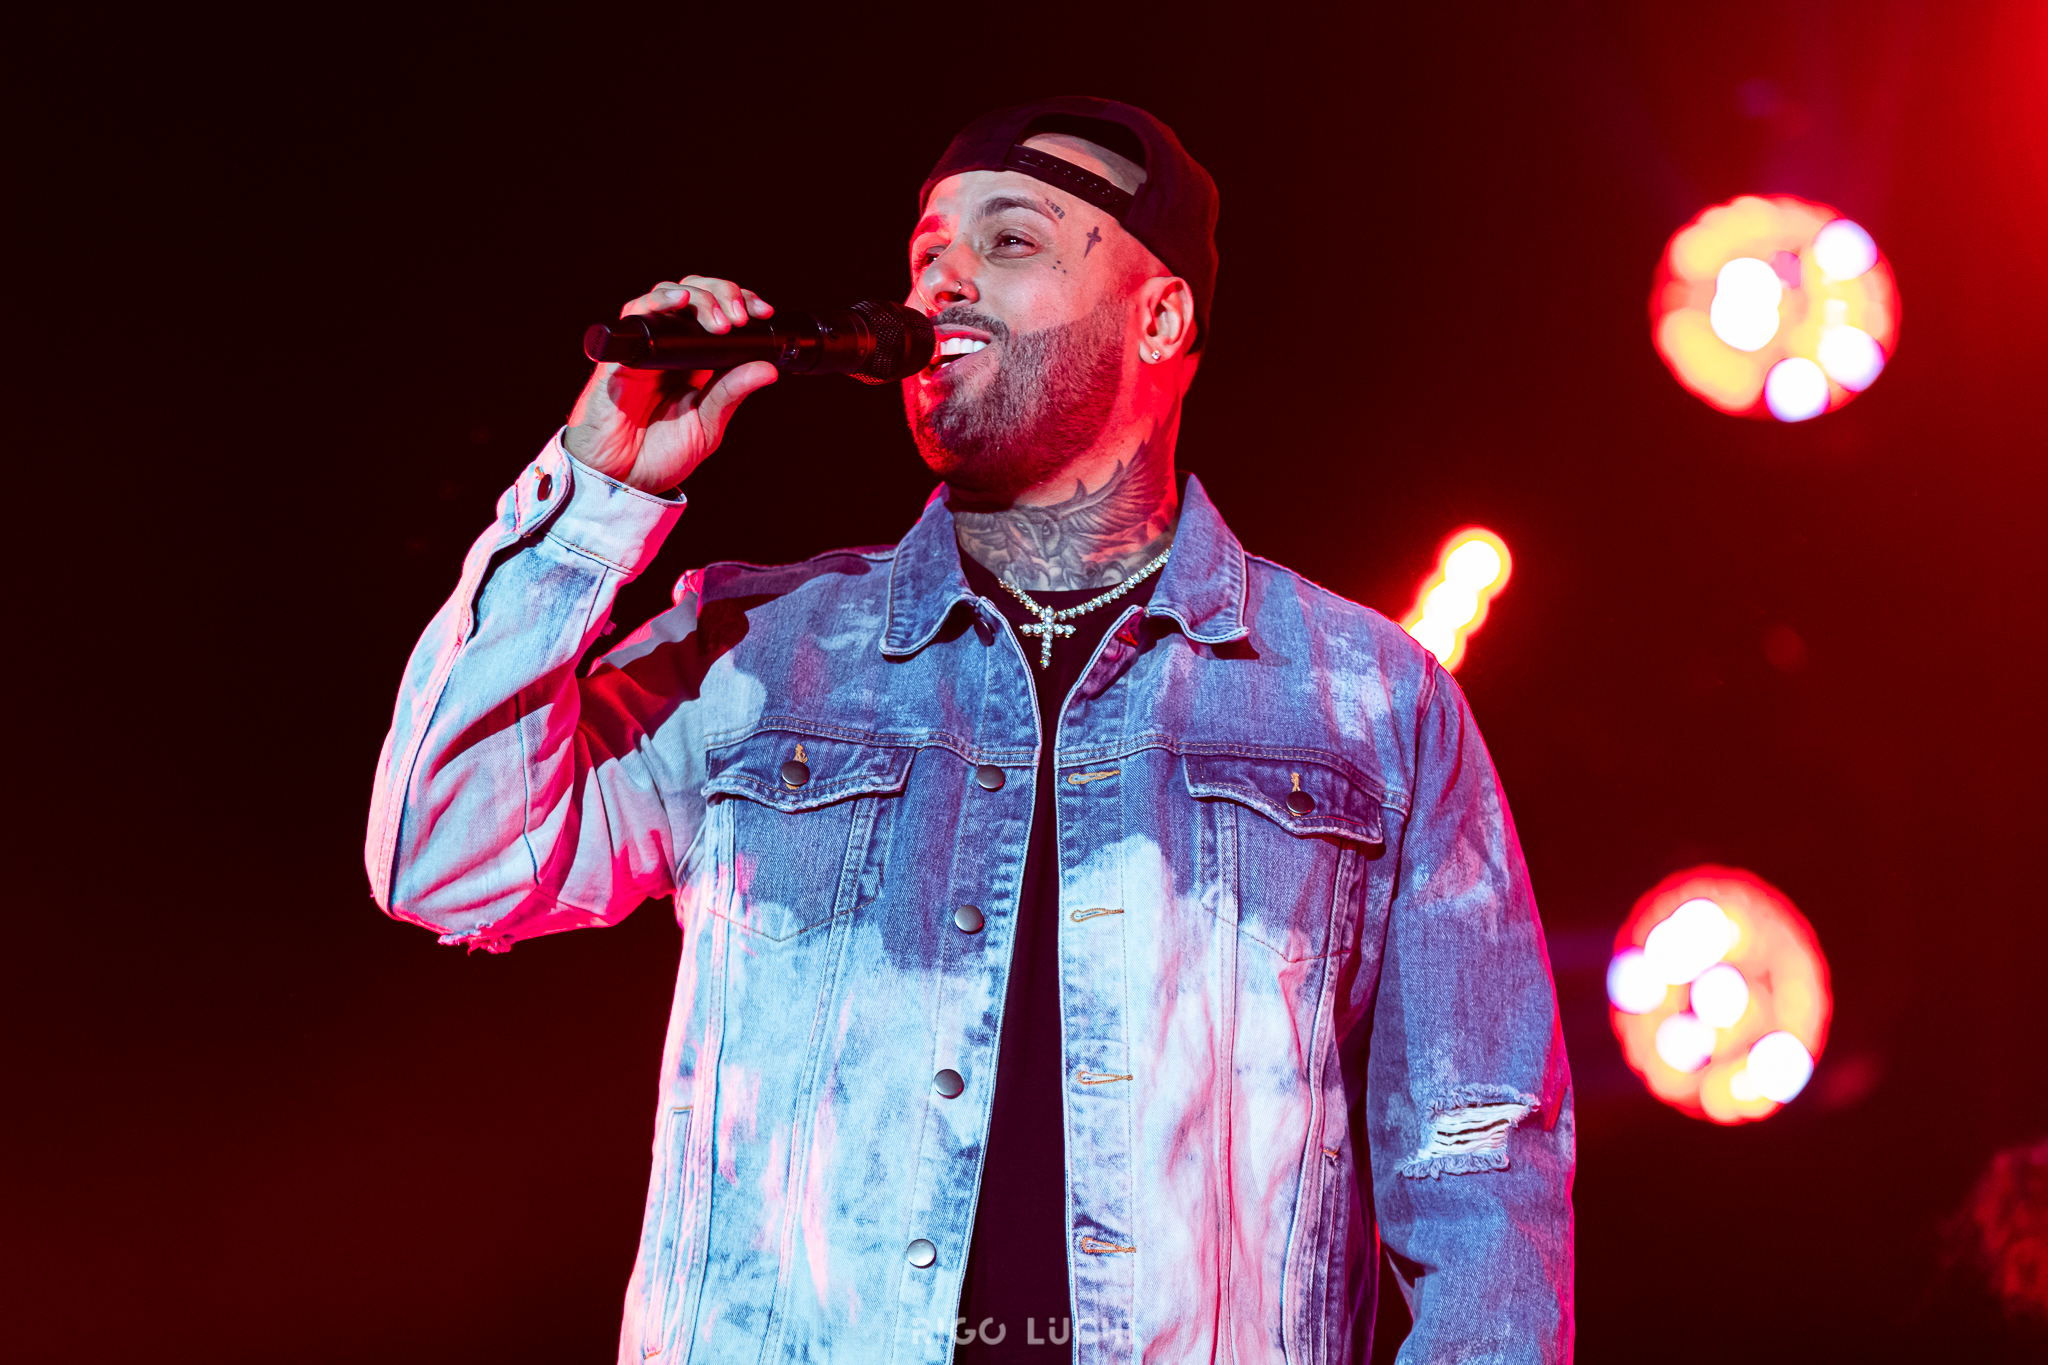 Nicky Jam in concert at Wembley